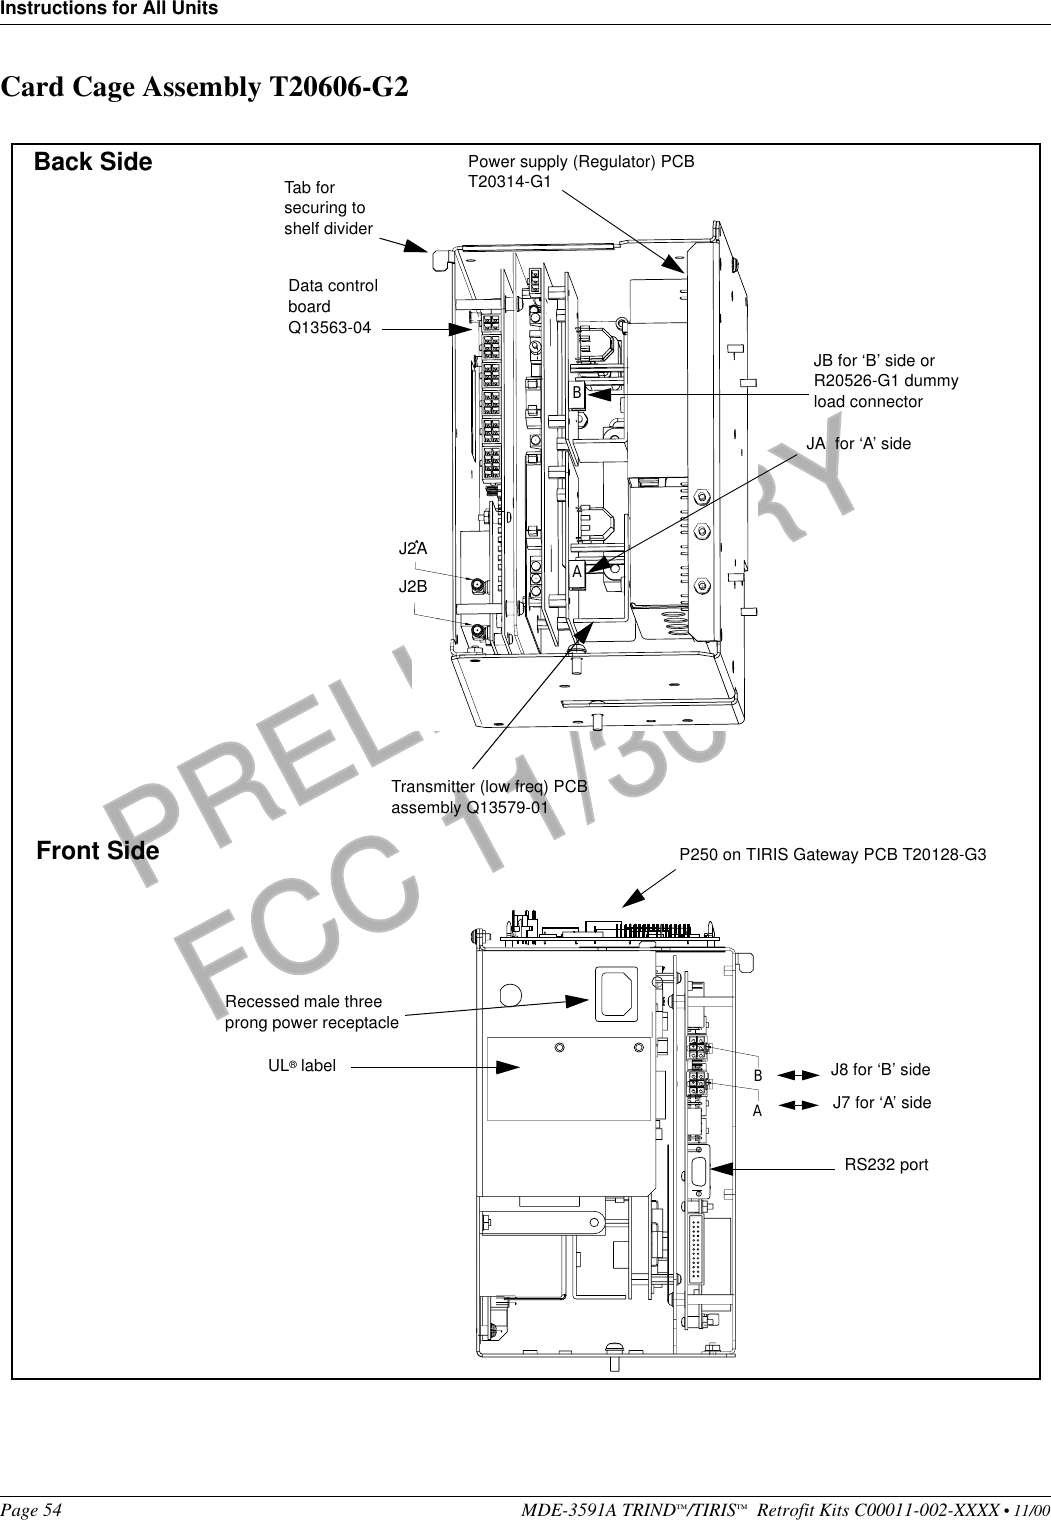 Instructions for All UnitsPage 54 MDE-3591A TRIND™/TIRIS™  Retrofit Kits C00011-002-XXXX • 11/00PRELIMINARYFCC 11/30Card Cage Assembly T20606-G2BAABBATransmitter (low freq) PCBassembly Q13579-01Data control board Q13563-04Power supply (Regulator) PCB T20314-G1JB for ‘B’ side or R20526-G1 dummy load connectorJA  for ‘A’ sideP250 on TIRIS Gateway PCB T20128-G3J2A J2B Recessed male three prong power receptacleUL® label J8 for ‘B’ sideJ7 for ‘A’ sideRS232 portBack SideFront SideTab for securing to shelf divider